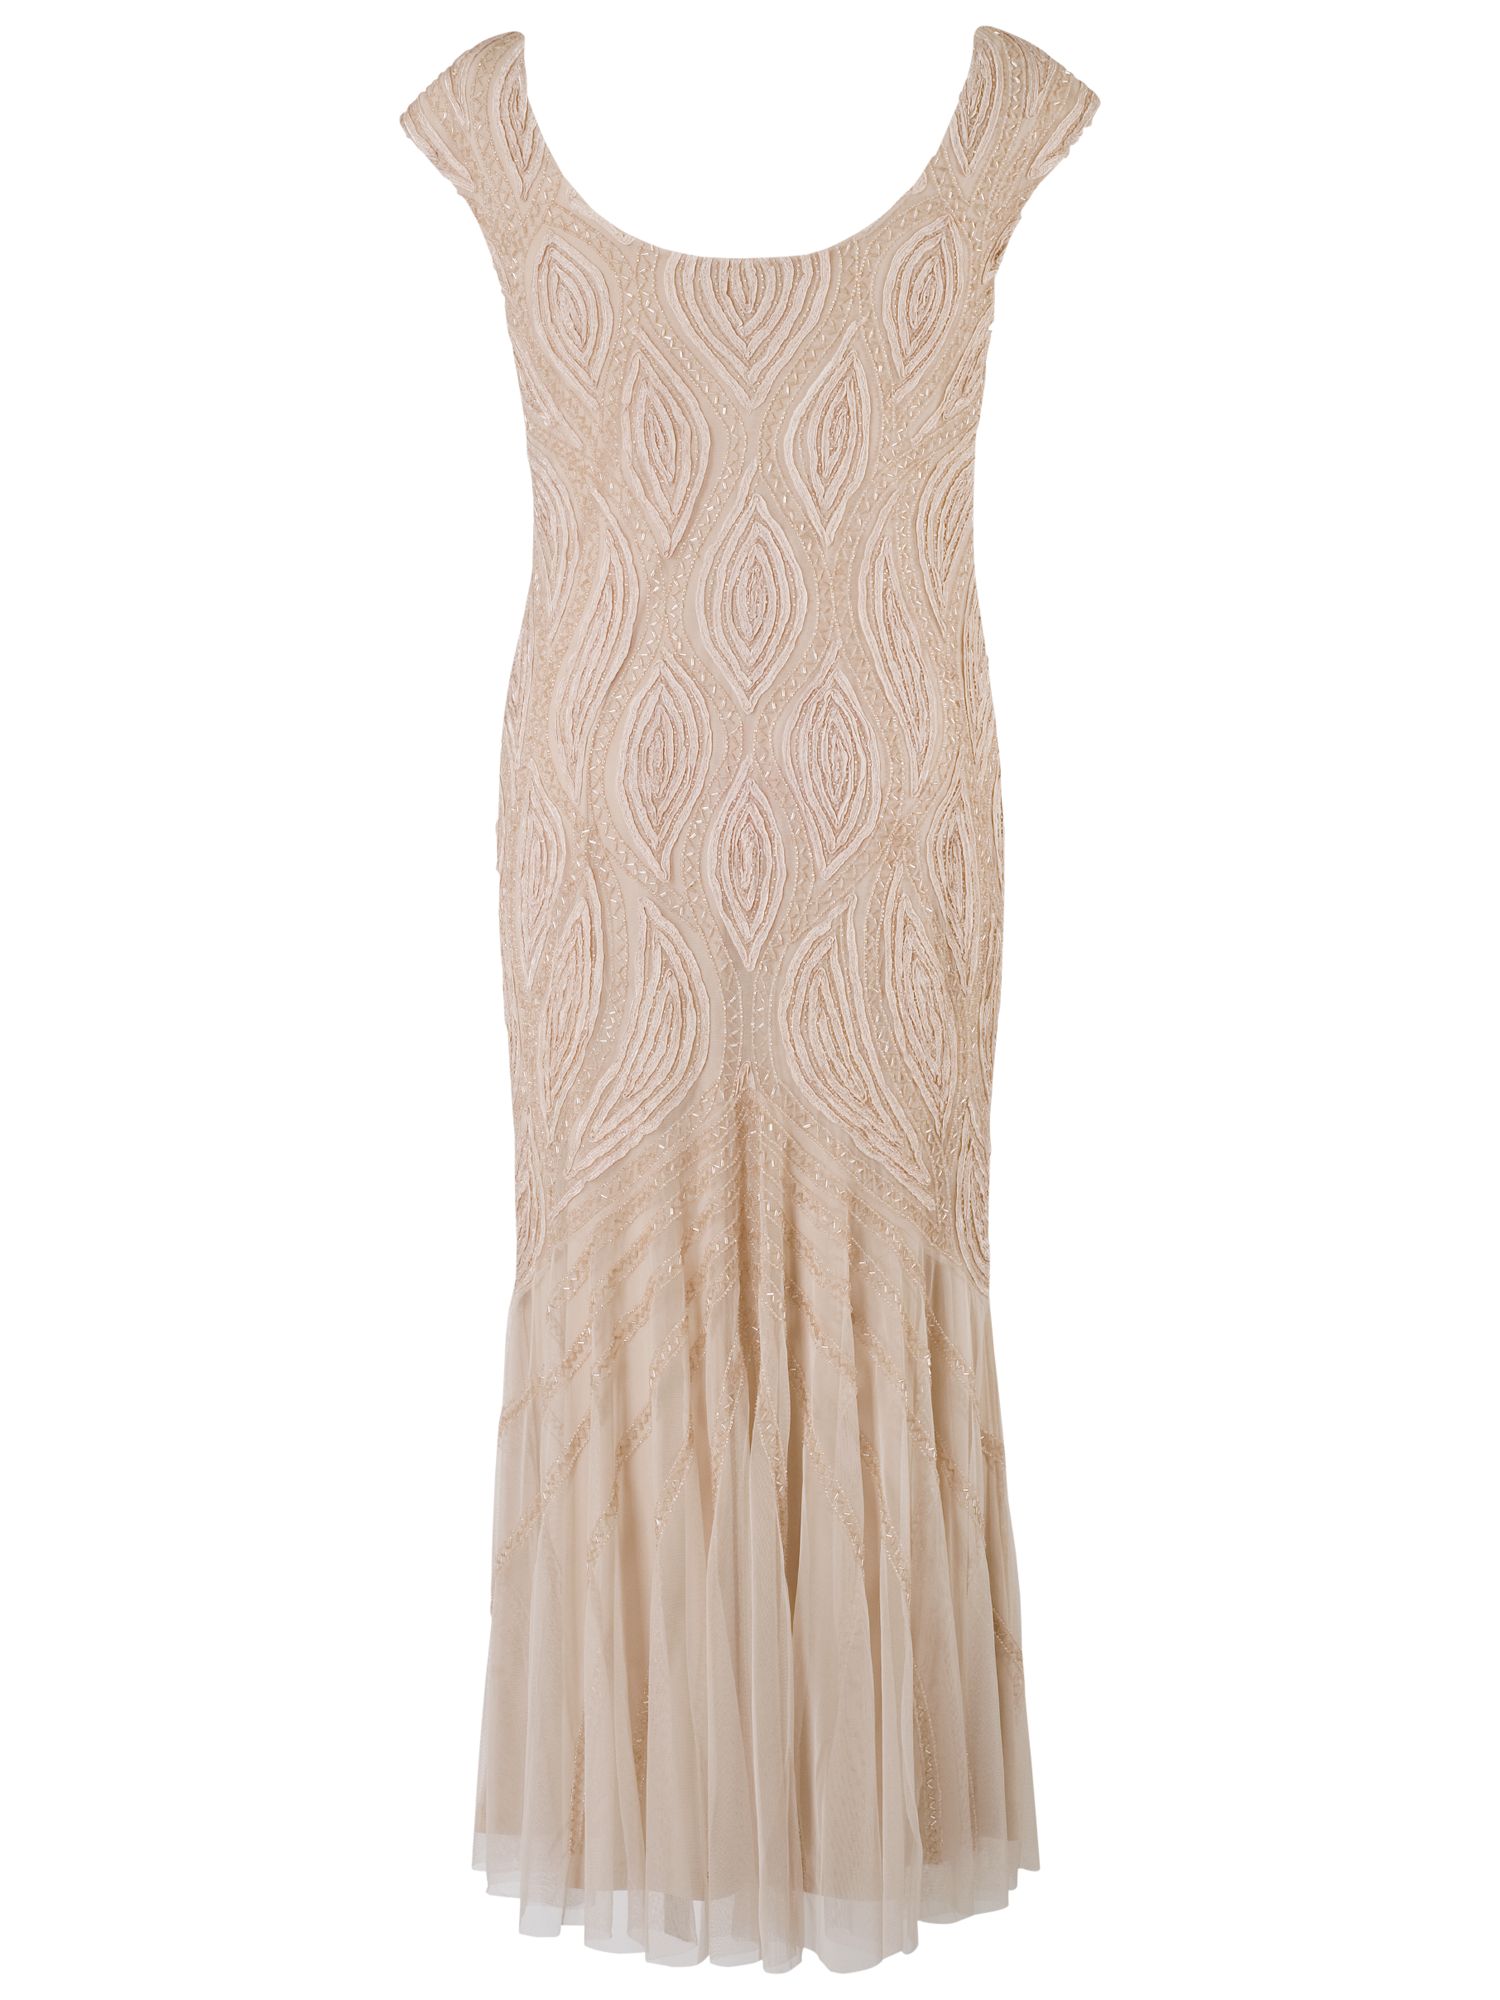 Buy Chesca Cornelli Bead Embroidered Dress, Champagne | John Lewis